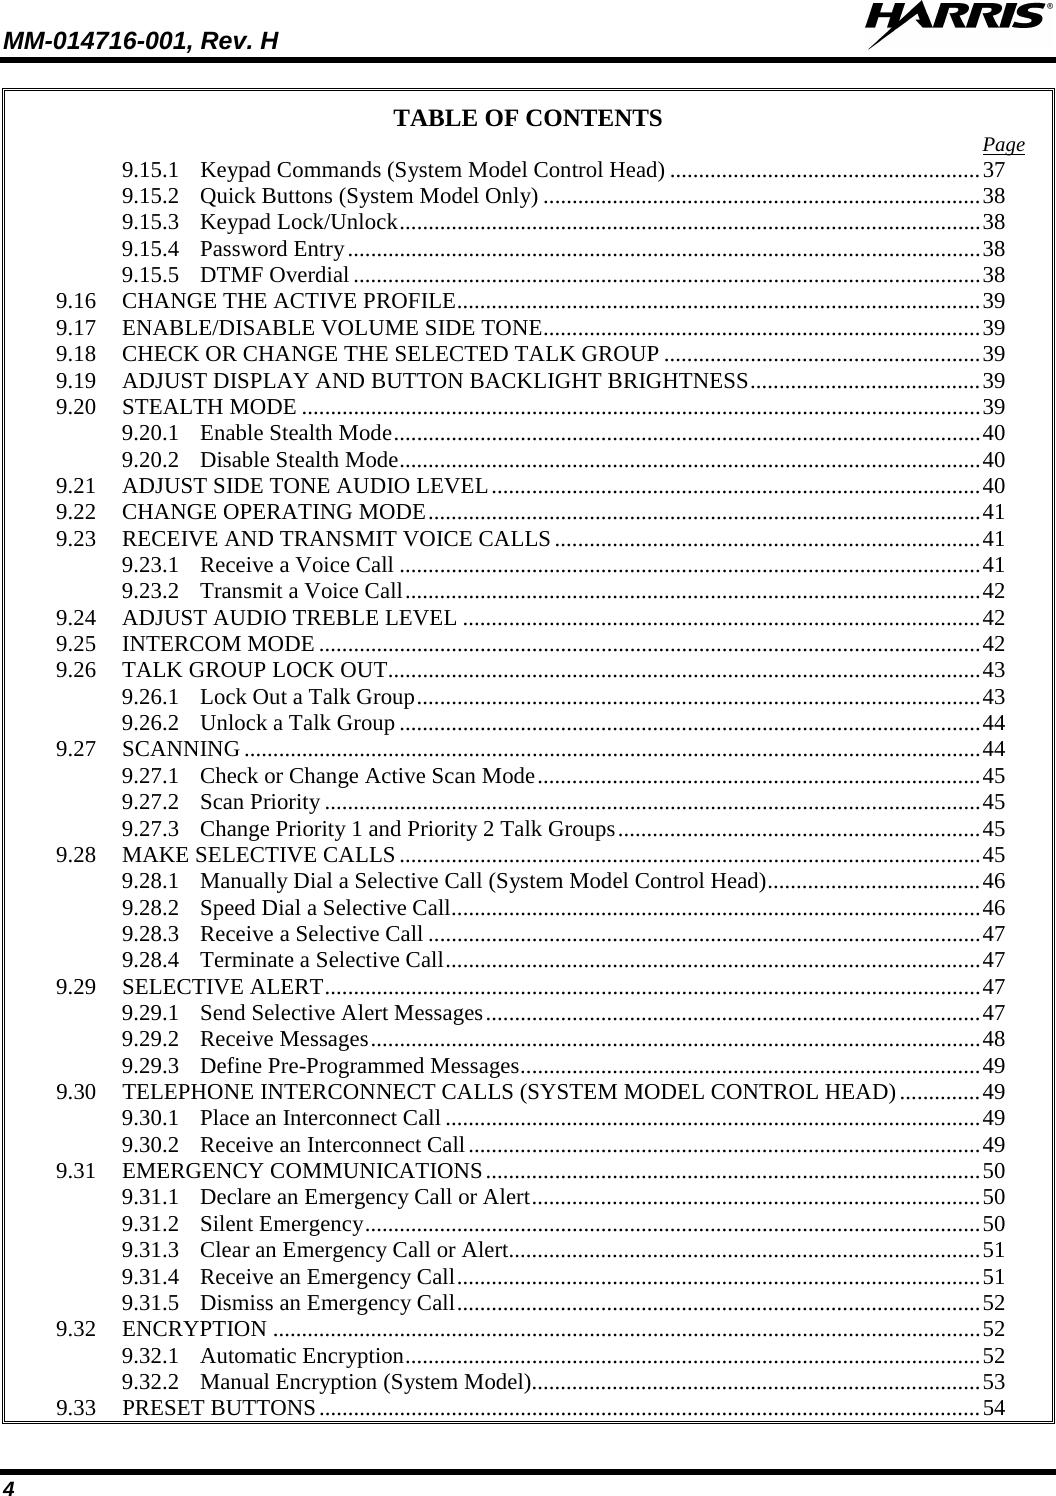 MM-014716-001, Rev. H  4 TABLE OF CONTENTS Page 9.15.1 Keypad Commands (System Model Control Head) ...................................................... 37 9.15.2 Quick Buttons (System Model Only) ............................................................................ 38 9.15.3 Keypad Lock/Unlock ..................................................................................................... 38 9.15.4 Password Entry .............................................................................................................. 38 9.15.5 DTMF Overdial ............................................................................................................. 38 9.16 CHANGE THE ACTIVE PROFILE ........................................................................................... 39 9.17 ENABLE/DISABLE VOLUME SIDE TONE ............................................................................ 39 9.18 CHECK OR CHANGE THE SELECTED TALK GROUP ....................................................... 39 9.19 ADJUST DISPLAY AND BUTTON BACKLIGHT BRIGHTNESS ........................................ 39 9.20 STEALTH MODE ...................................................................................................................... 39 9.20.1 Enable Stealth Mode ...................................................................................................... 40 9.20.2 Disable Stealth Mode ..................................................................................................... 40 9.21 ADJUST SIDE TONE AUDIO LEVEL ..................................................................................... 40 9.22 CHANGE OPERATING MODE ................................................................................................ 41 9.23 RECEIVE AND TRANSMIT VOICE CALLS .......................................................................... 41 9.23.1 Receive a Voice Call ..................................................................................................... 41 9.23.2 Transmit a Voice Call .................................................................................................... 42 9.24 ADJUST AUDIO TREBLE LEVEL .......................................................................................... 42 9.25 INTERCOM MODE ................................................................................................................... 42 9.26 TALK GROUP LOCK OUT ....................................................................................................... 43 9.26.1 Lock Out a Talk Group .................................................................................................. 43 9.26.2 Unlock a Talk Group ..................................................................................................... 44 9.27 SCANNING ................................................................................................................................ 44 9.27.1 Check or Change Active Scan Mode ............................................................................. 45 9.27.2 Scan Priority .................................................................................................................. 45 9.27.3 Change Priority 1 and Priority 2 Talk Groups ............................................................... 45 9.28 MAKE SELECTIVE CALLS ..................................................................................................... 45 9.28.1 Manually Dial a Selective Call (System Model Control Head) ..................................... 46 9.28.2 Speed Dial a Selective Call ............................................................................................ 46 9.28.3 Receive a Selective Call ................................................................................................ 47 9.28.4 Terminate a Selective Call ............................................................................................. 47 9.29 SELECTIVE ALERT .................................................................................................................. 47 9.29.1 Send Selective Alert Messages ...................................................................................... 47 9.29.2 Receive Messages .......................................................................................................... 48 9.29.3 Define Pre-Programmed Messages ................................................................................ 49 9.30 TELEPHONE INTERCONNECT CALLS (SYSTEM MODEL CONTROL HEAD) .............. 49 9.30.1 Place an Interconnect Call ............................................................................................. 49 9.30.2 Receive an Interconnect Call ......................................................................................... 49 9.31 EMERGENCY COMMUNICATIONS ...................................................................................... 50 9.31.1 Declare an Emergency Call or Alert .............................................................................. 50 9.31.2 Silent Emergency ........................................................................................................... 50 9.31.3 Clear an Emergency Call or Alert.................................................................................. 51 9.31.4 Receive an Emergency Call ........................................................................................... 51 9.31.5 Dismiss an Emergency Call ........................................................................................... 52 9.32 ENCRYPTION ........................................................................................................................... 52 9.32.1 Automatic Encryption .................................................................................................... 52 9.32.2 Manual Encryption (System Model).............................................................................. 53 9.33 PRESET BUTTONS ................................................................................................................... 54 